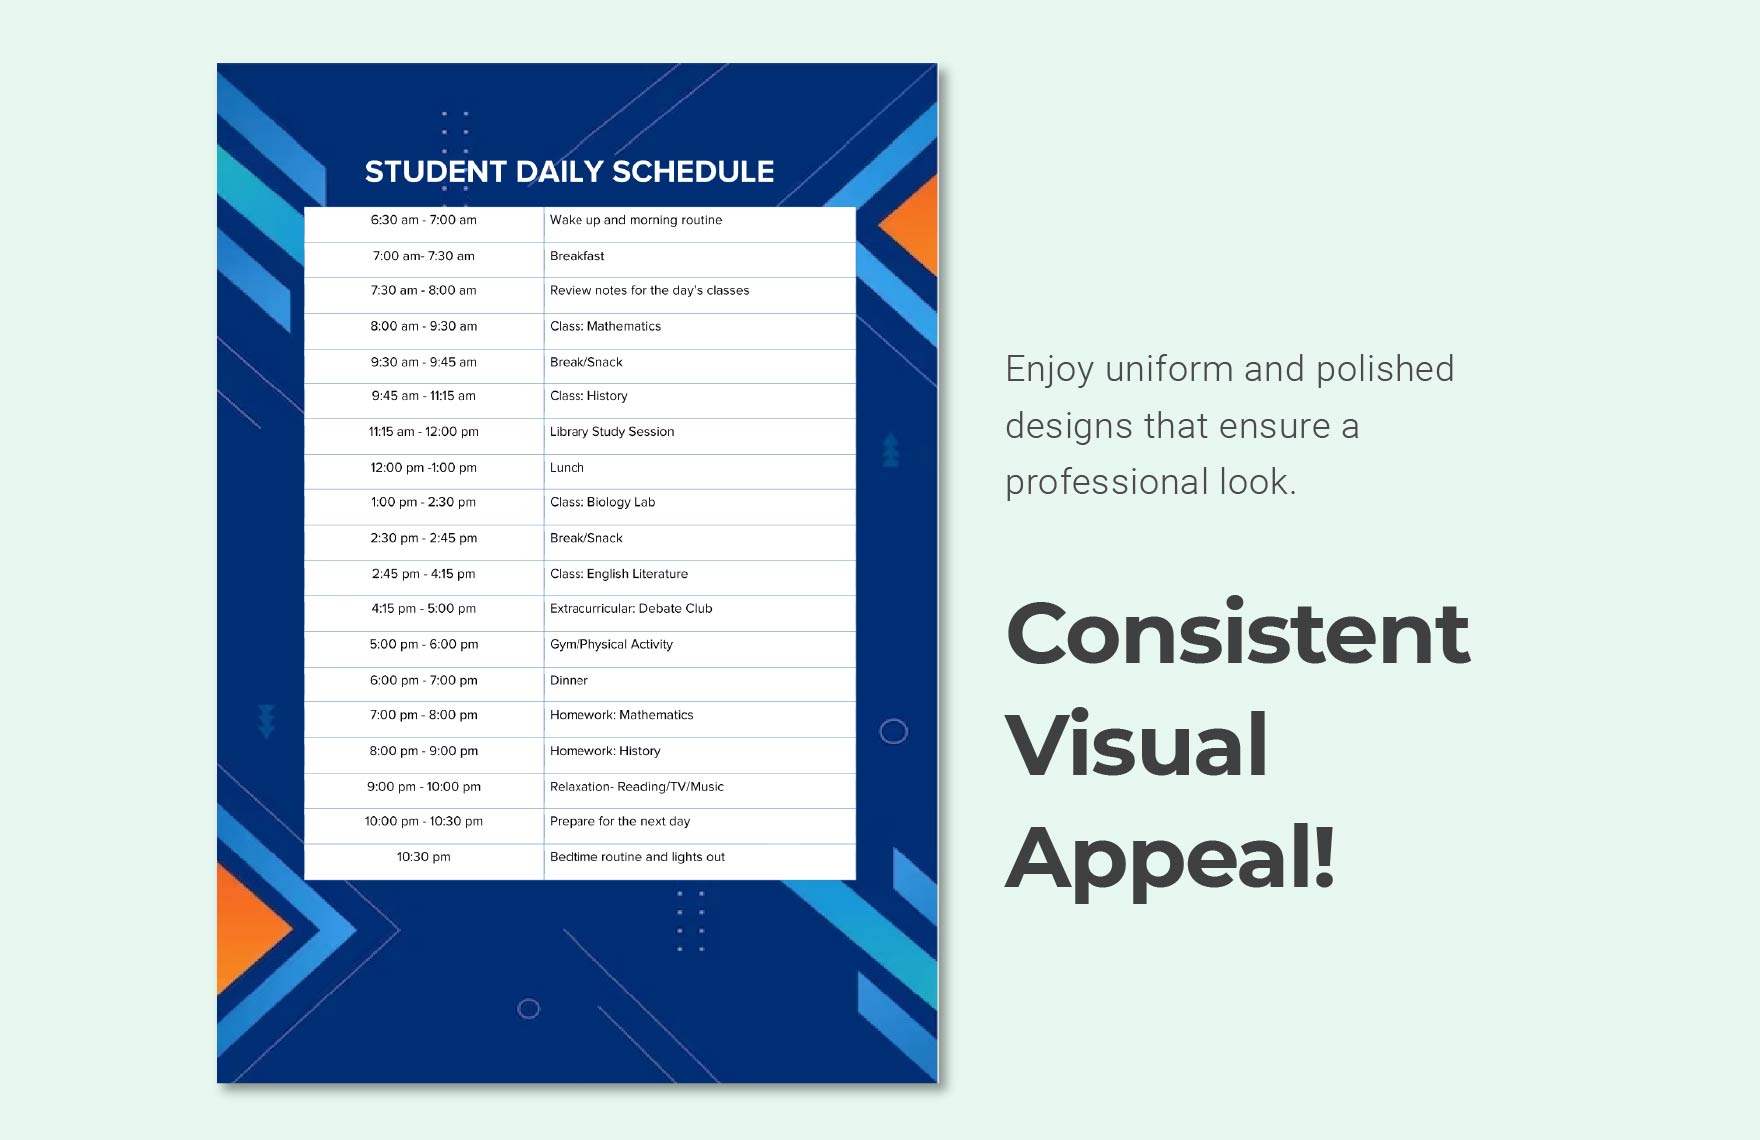 Student Daily Schedule Template